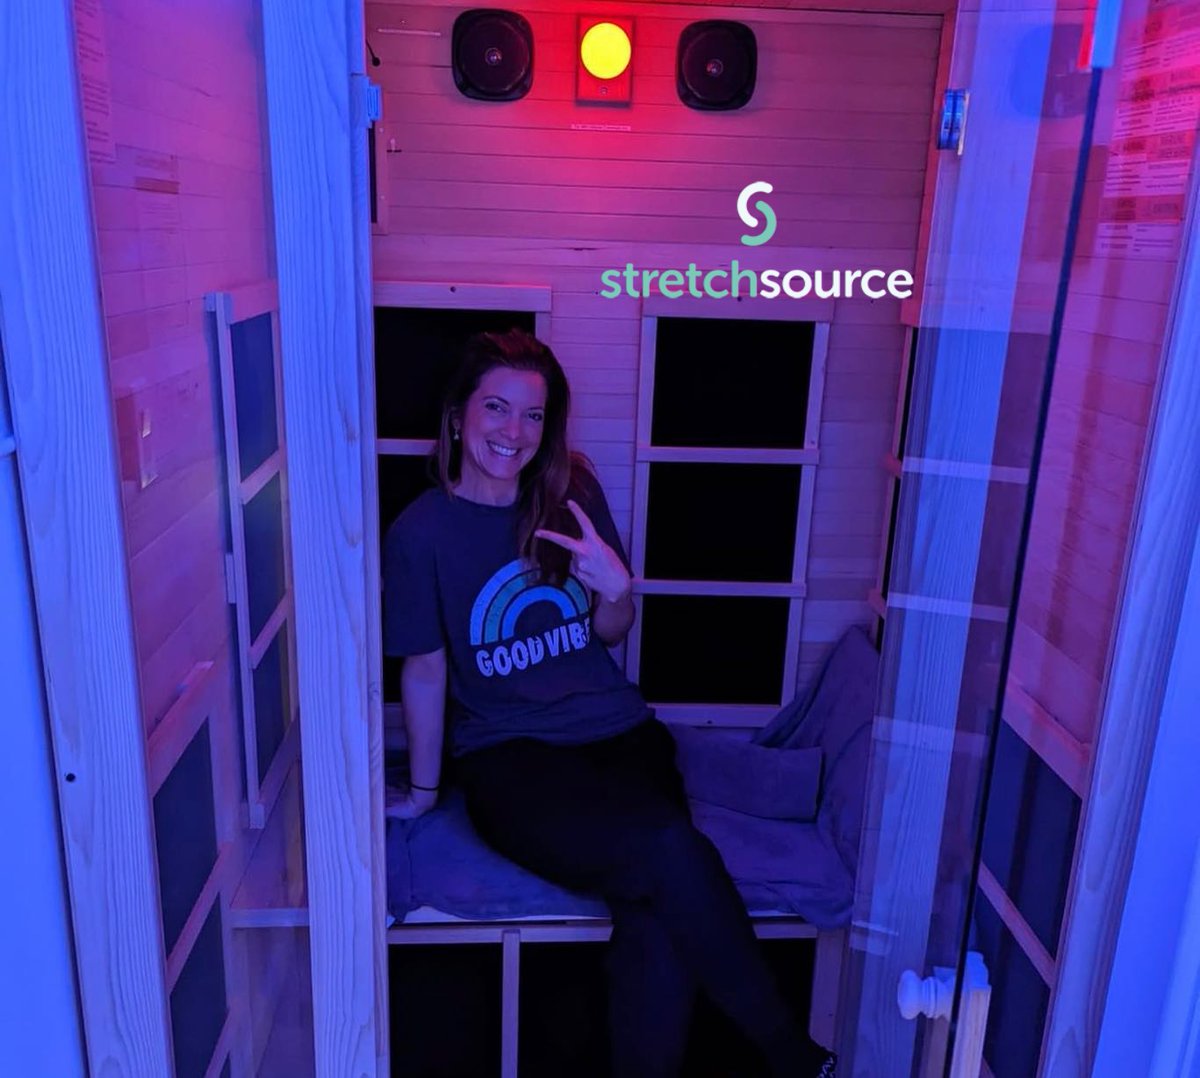 #BoontonNJ Biohacking Boutique stretchsource.com's wellness therapies' include Contrast Therapy accompanying their Pliability Stretch™ sessions. Coupling their JNH 3 #InfraredSauna & Cold Plunge helps with lymphatic circulation, speeds recovery & boosts immune function.